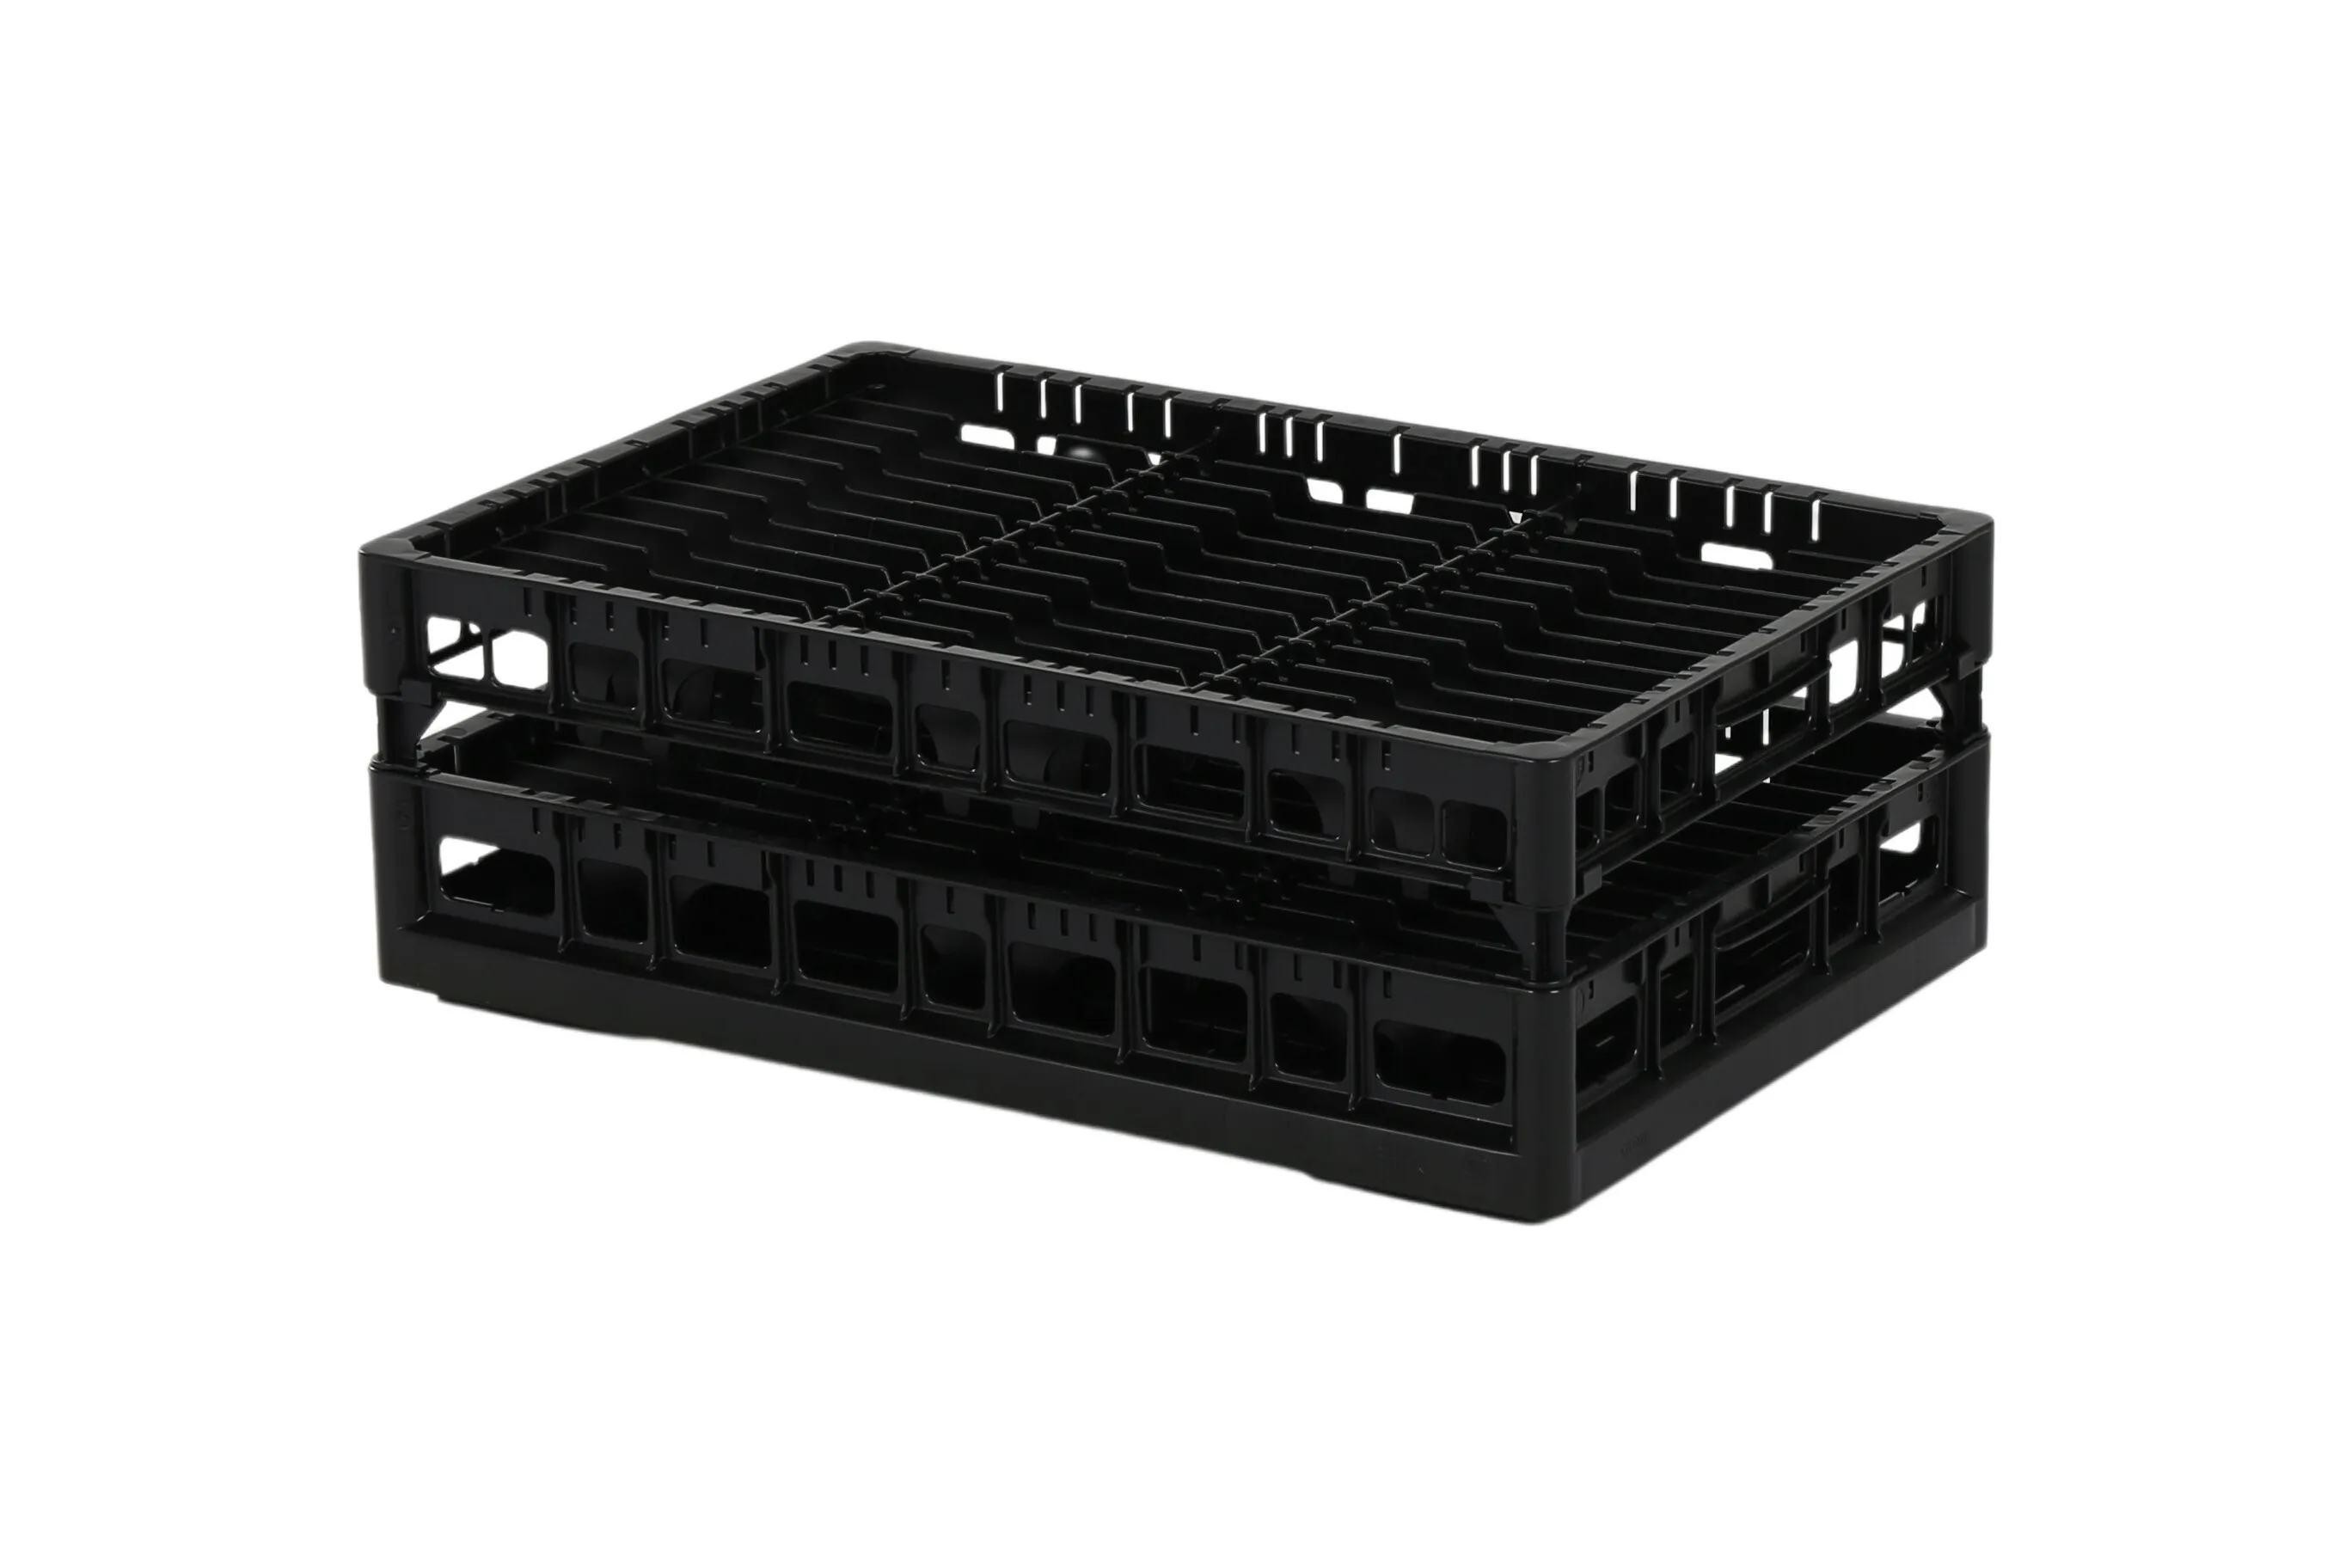 Clixrack Plate basket 600 x 400 mm black - Plate height max. 28mm - with 3 x 12 compartment division - maximum Ø plate 170 mm 